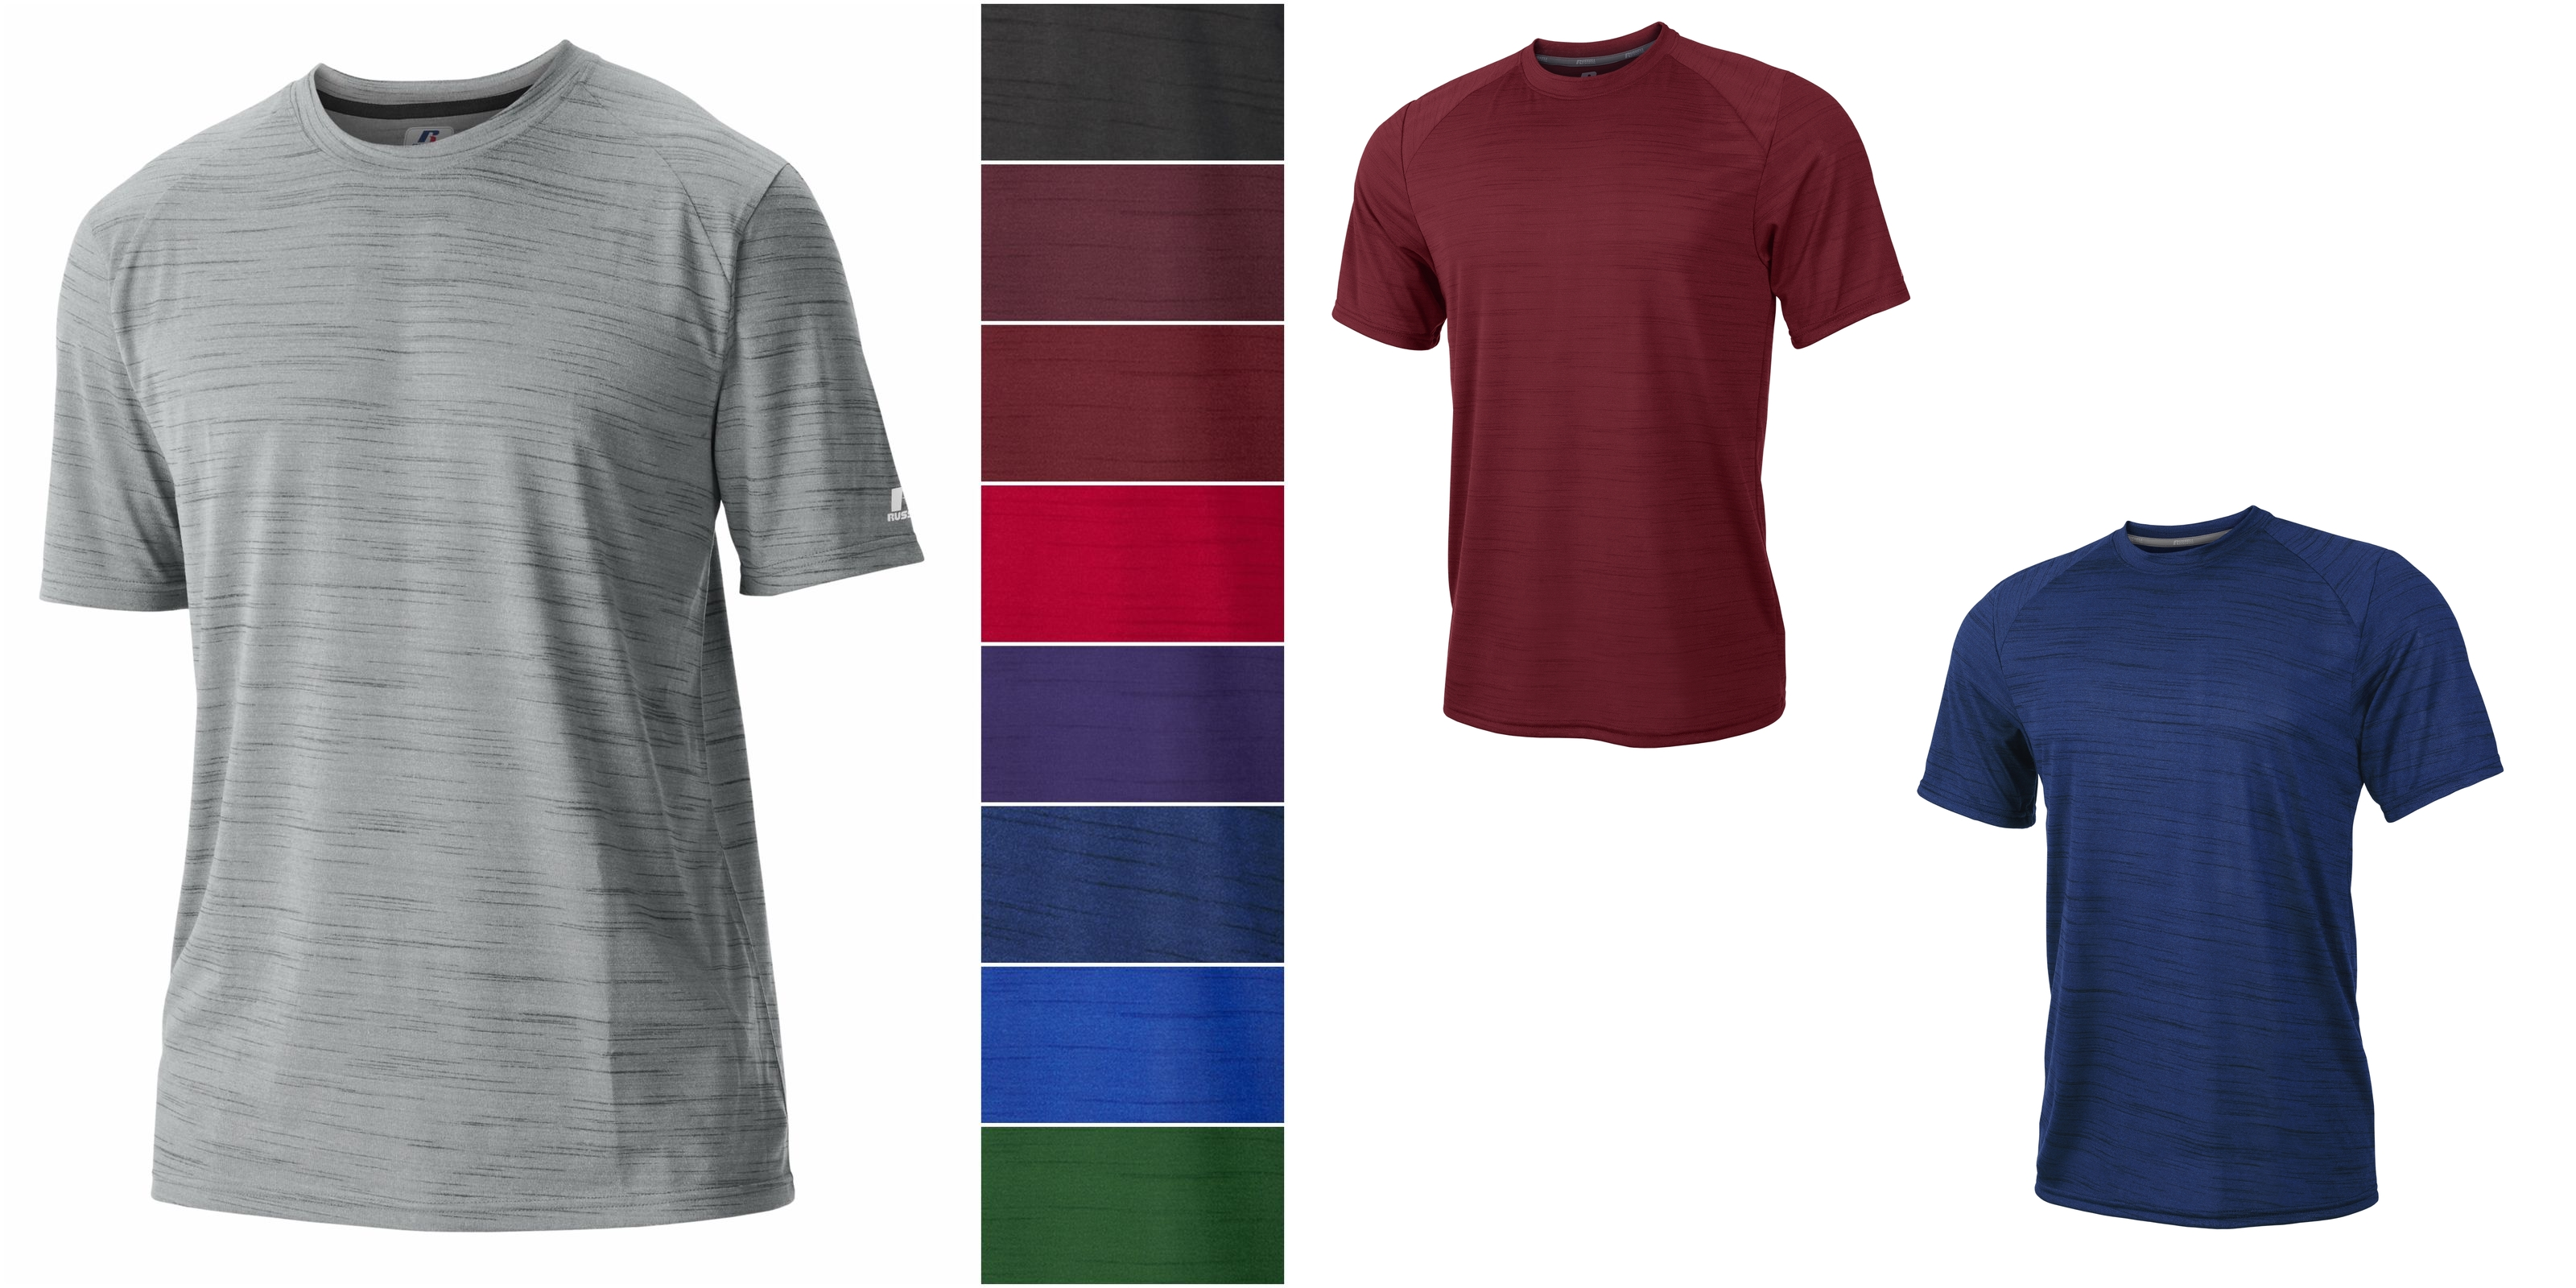 Russell Athletic Men’s DRI-POWER Tees Only $6.99 + FREE Shipping! LOTS of Colors!